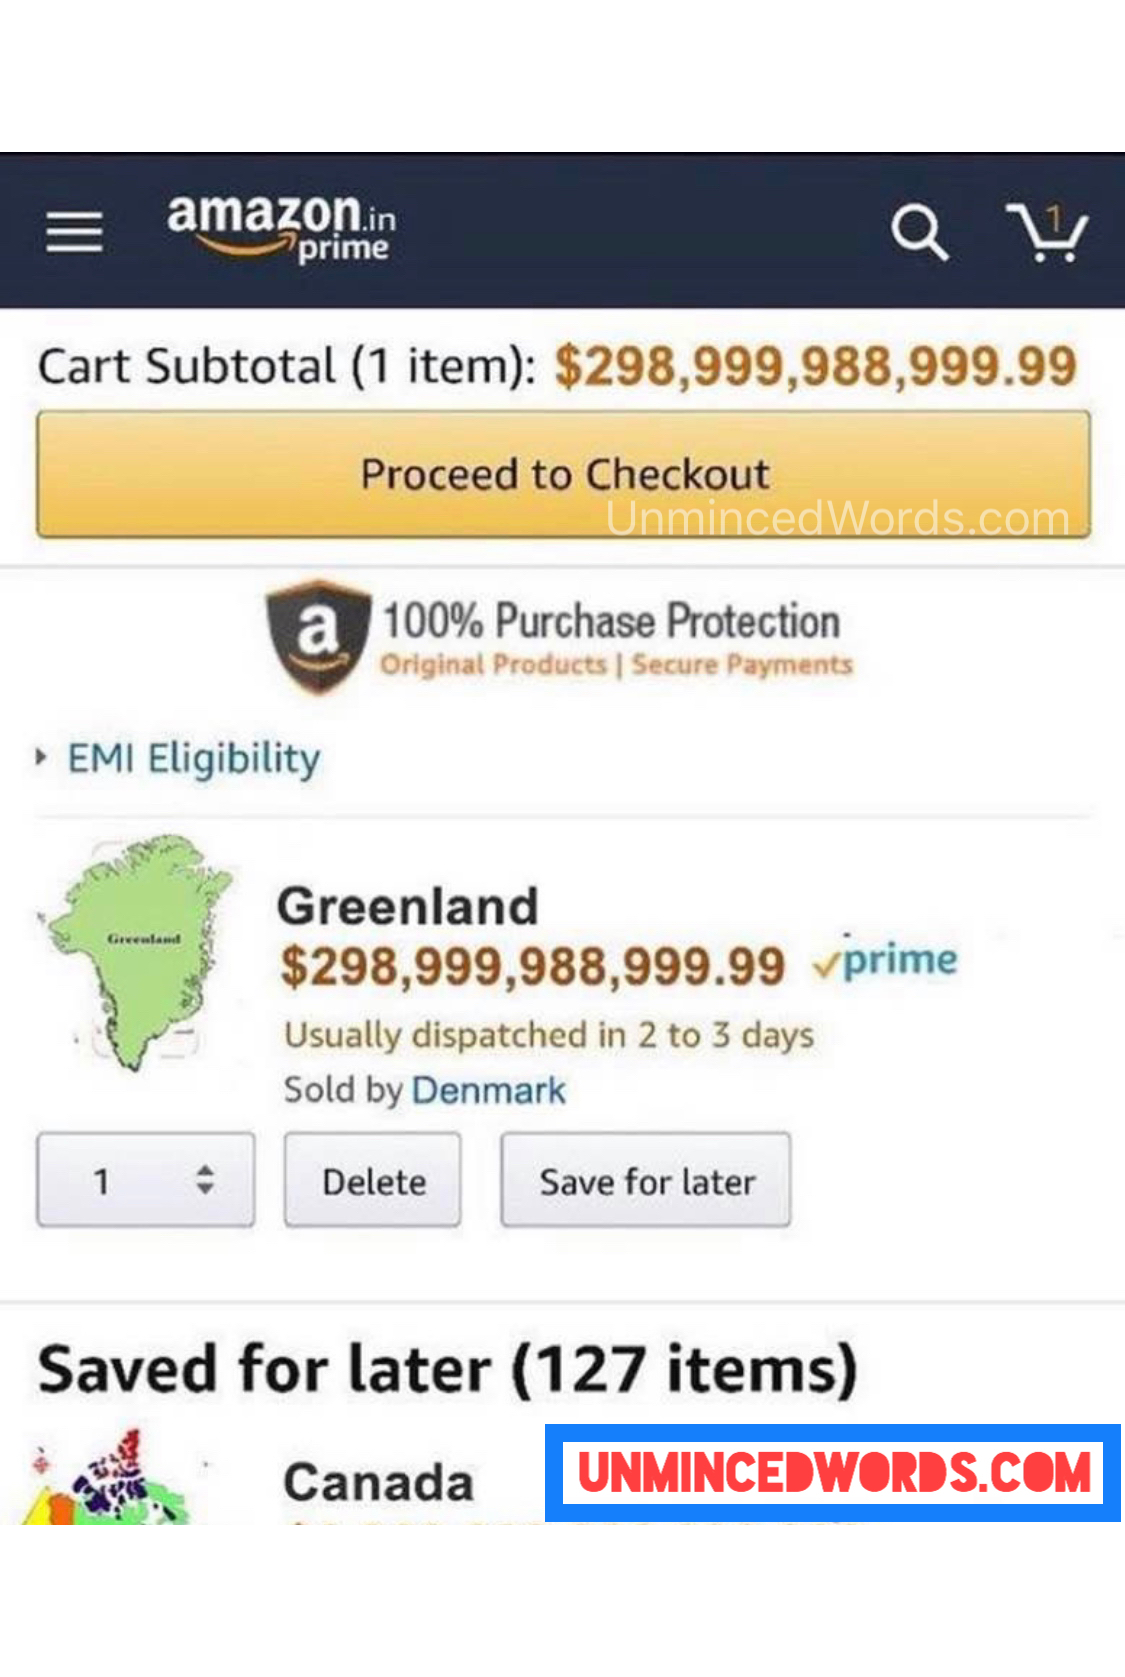 Greenland can be yours! And there is 1 item in cart.